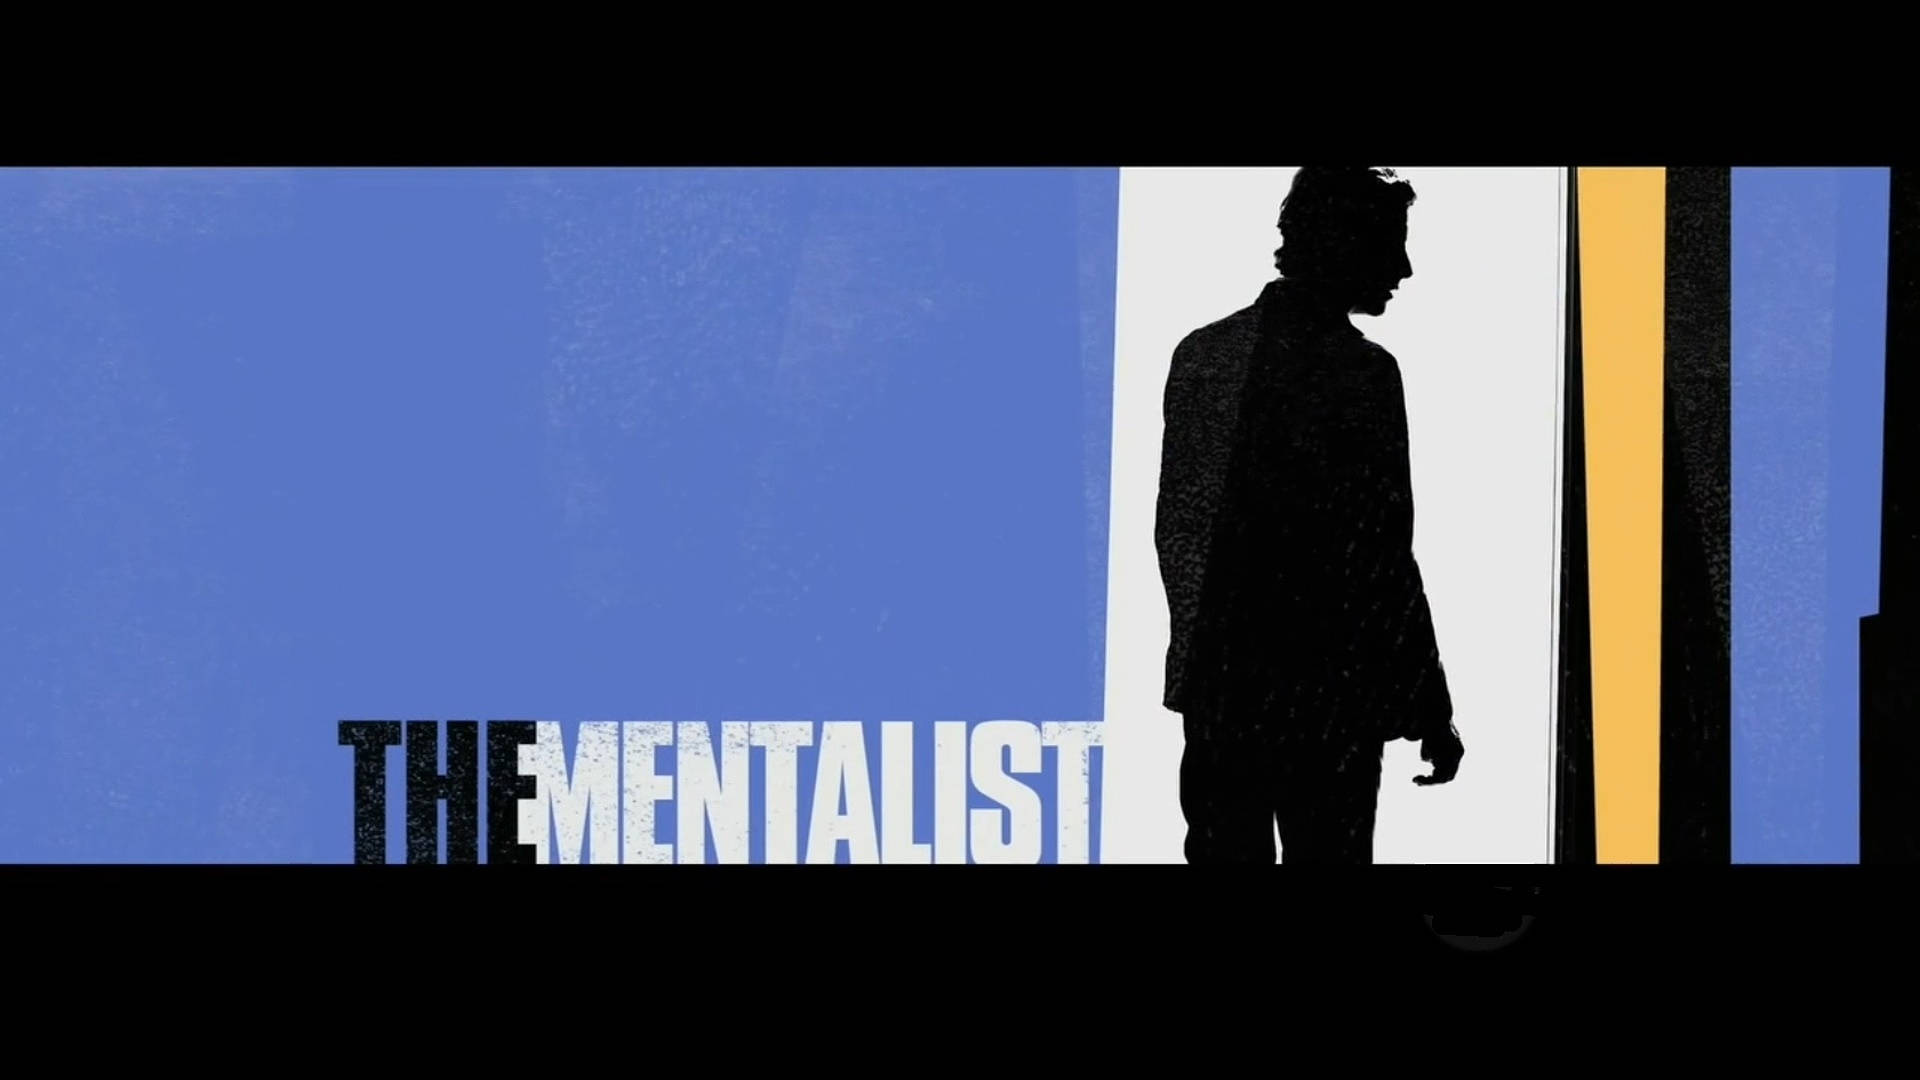 The Mentalist Tv Series Poster Background